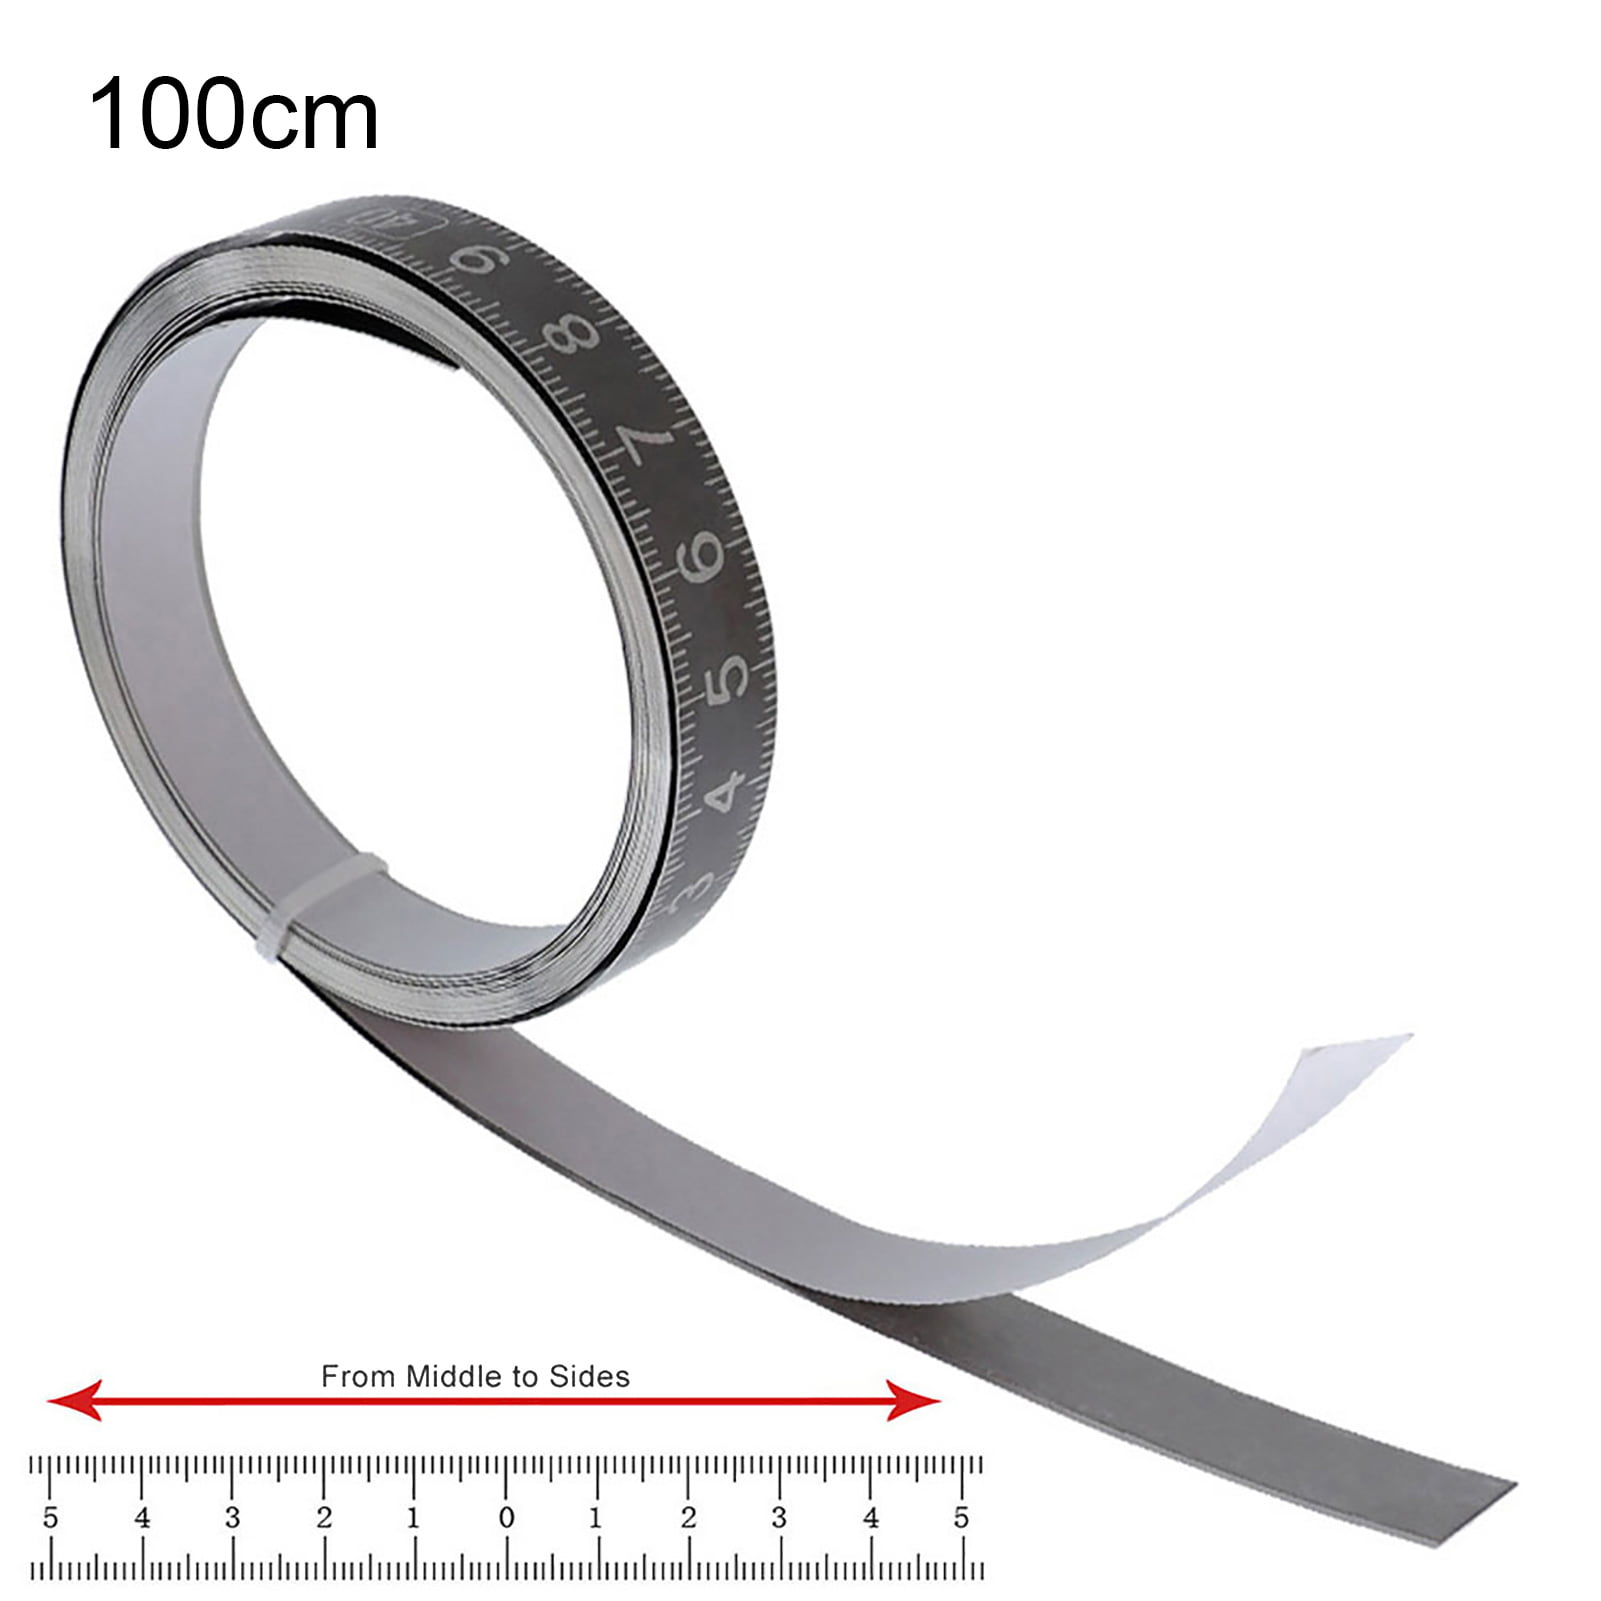 Self-Adhesive Stainless Steel Measure Tape Ruler for Carpentry Workbench Utility 